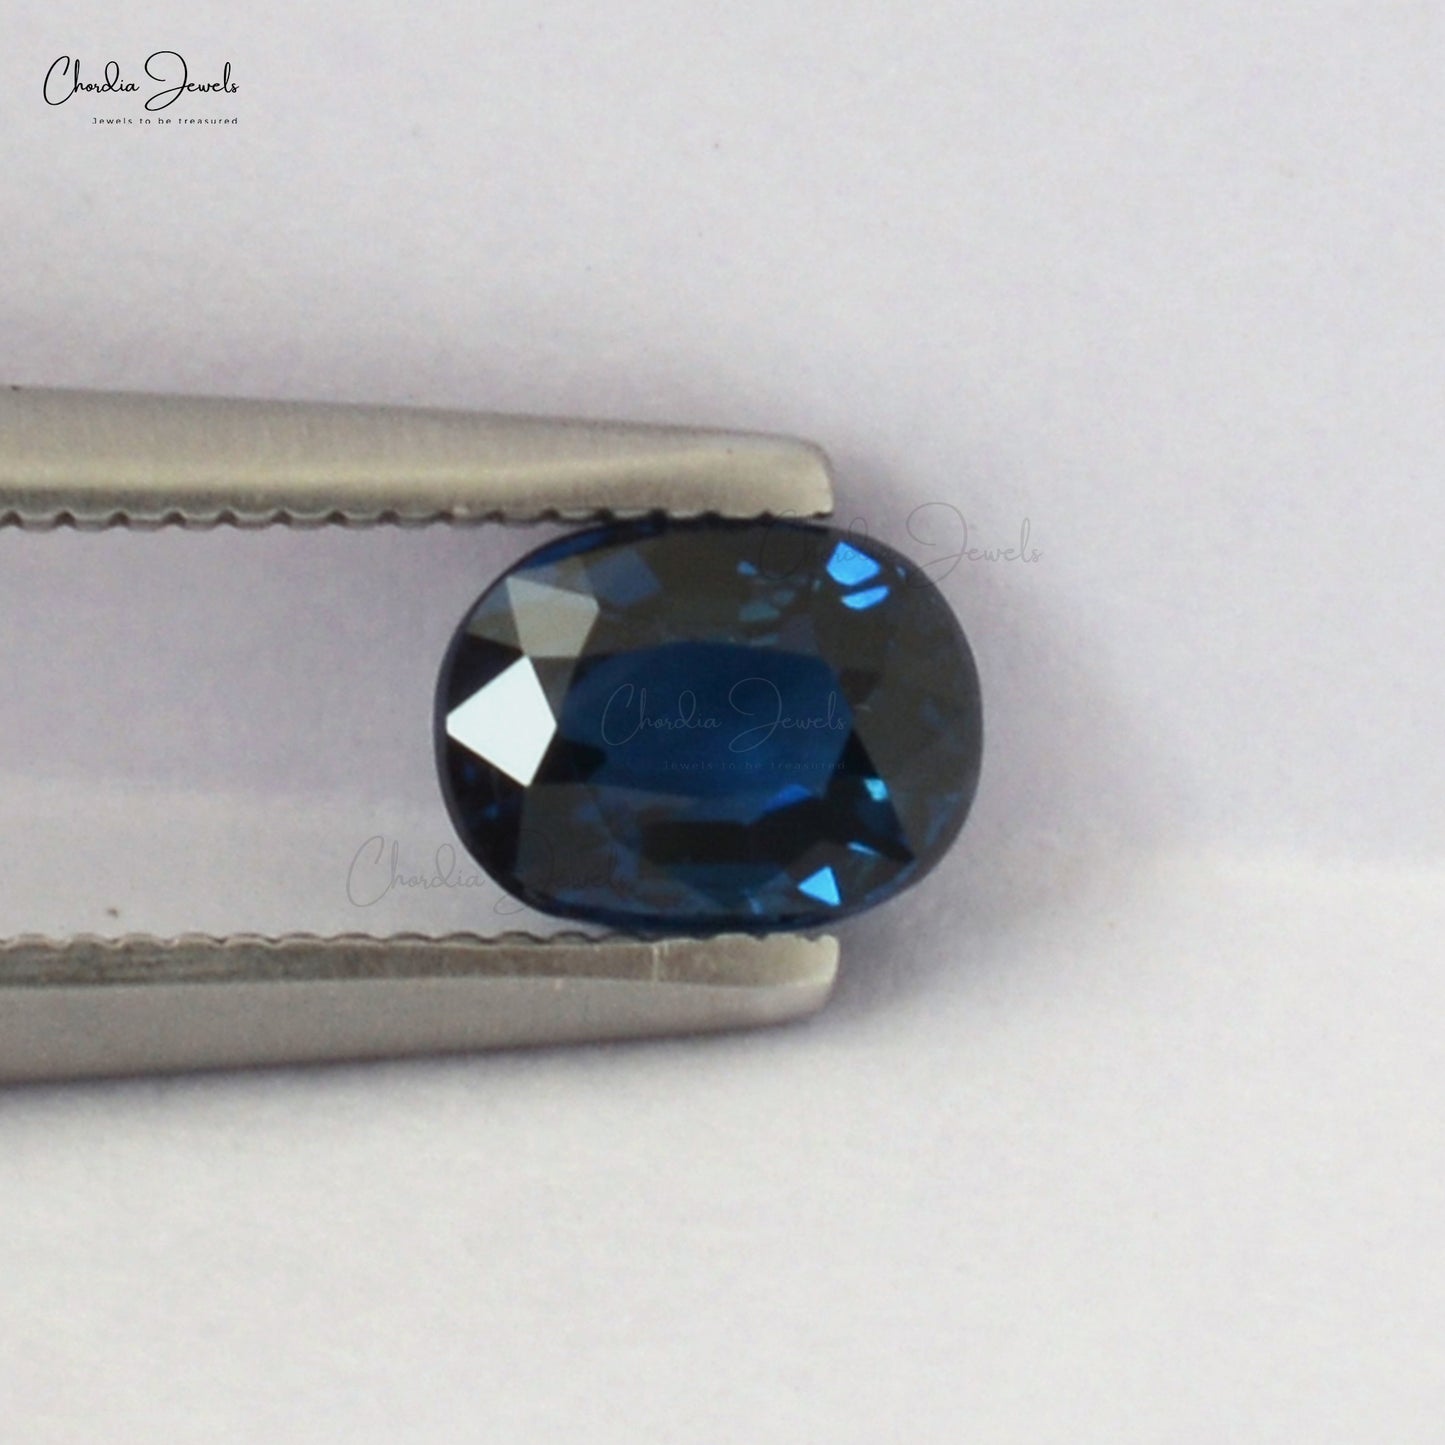 Load image into Gallery viewer, 1.1 carat Super Fine Quality Blue Sapphire Oval Cut Gemstone for Making Necklaces, 1 Piece
